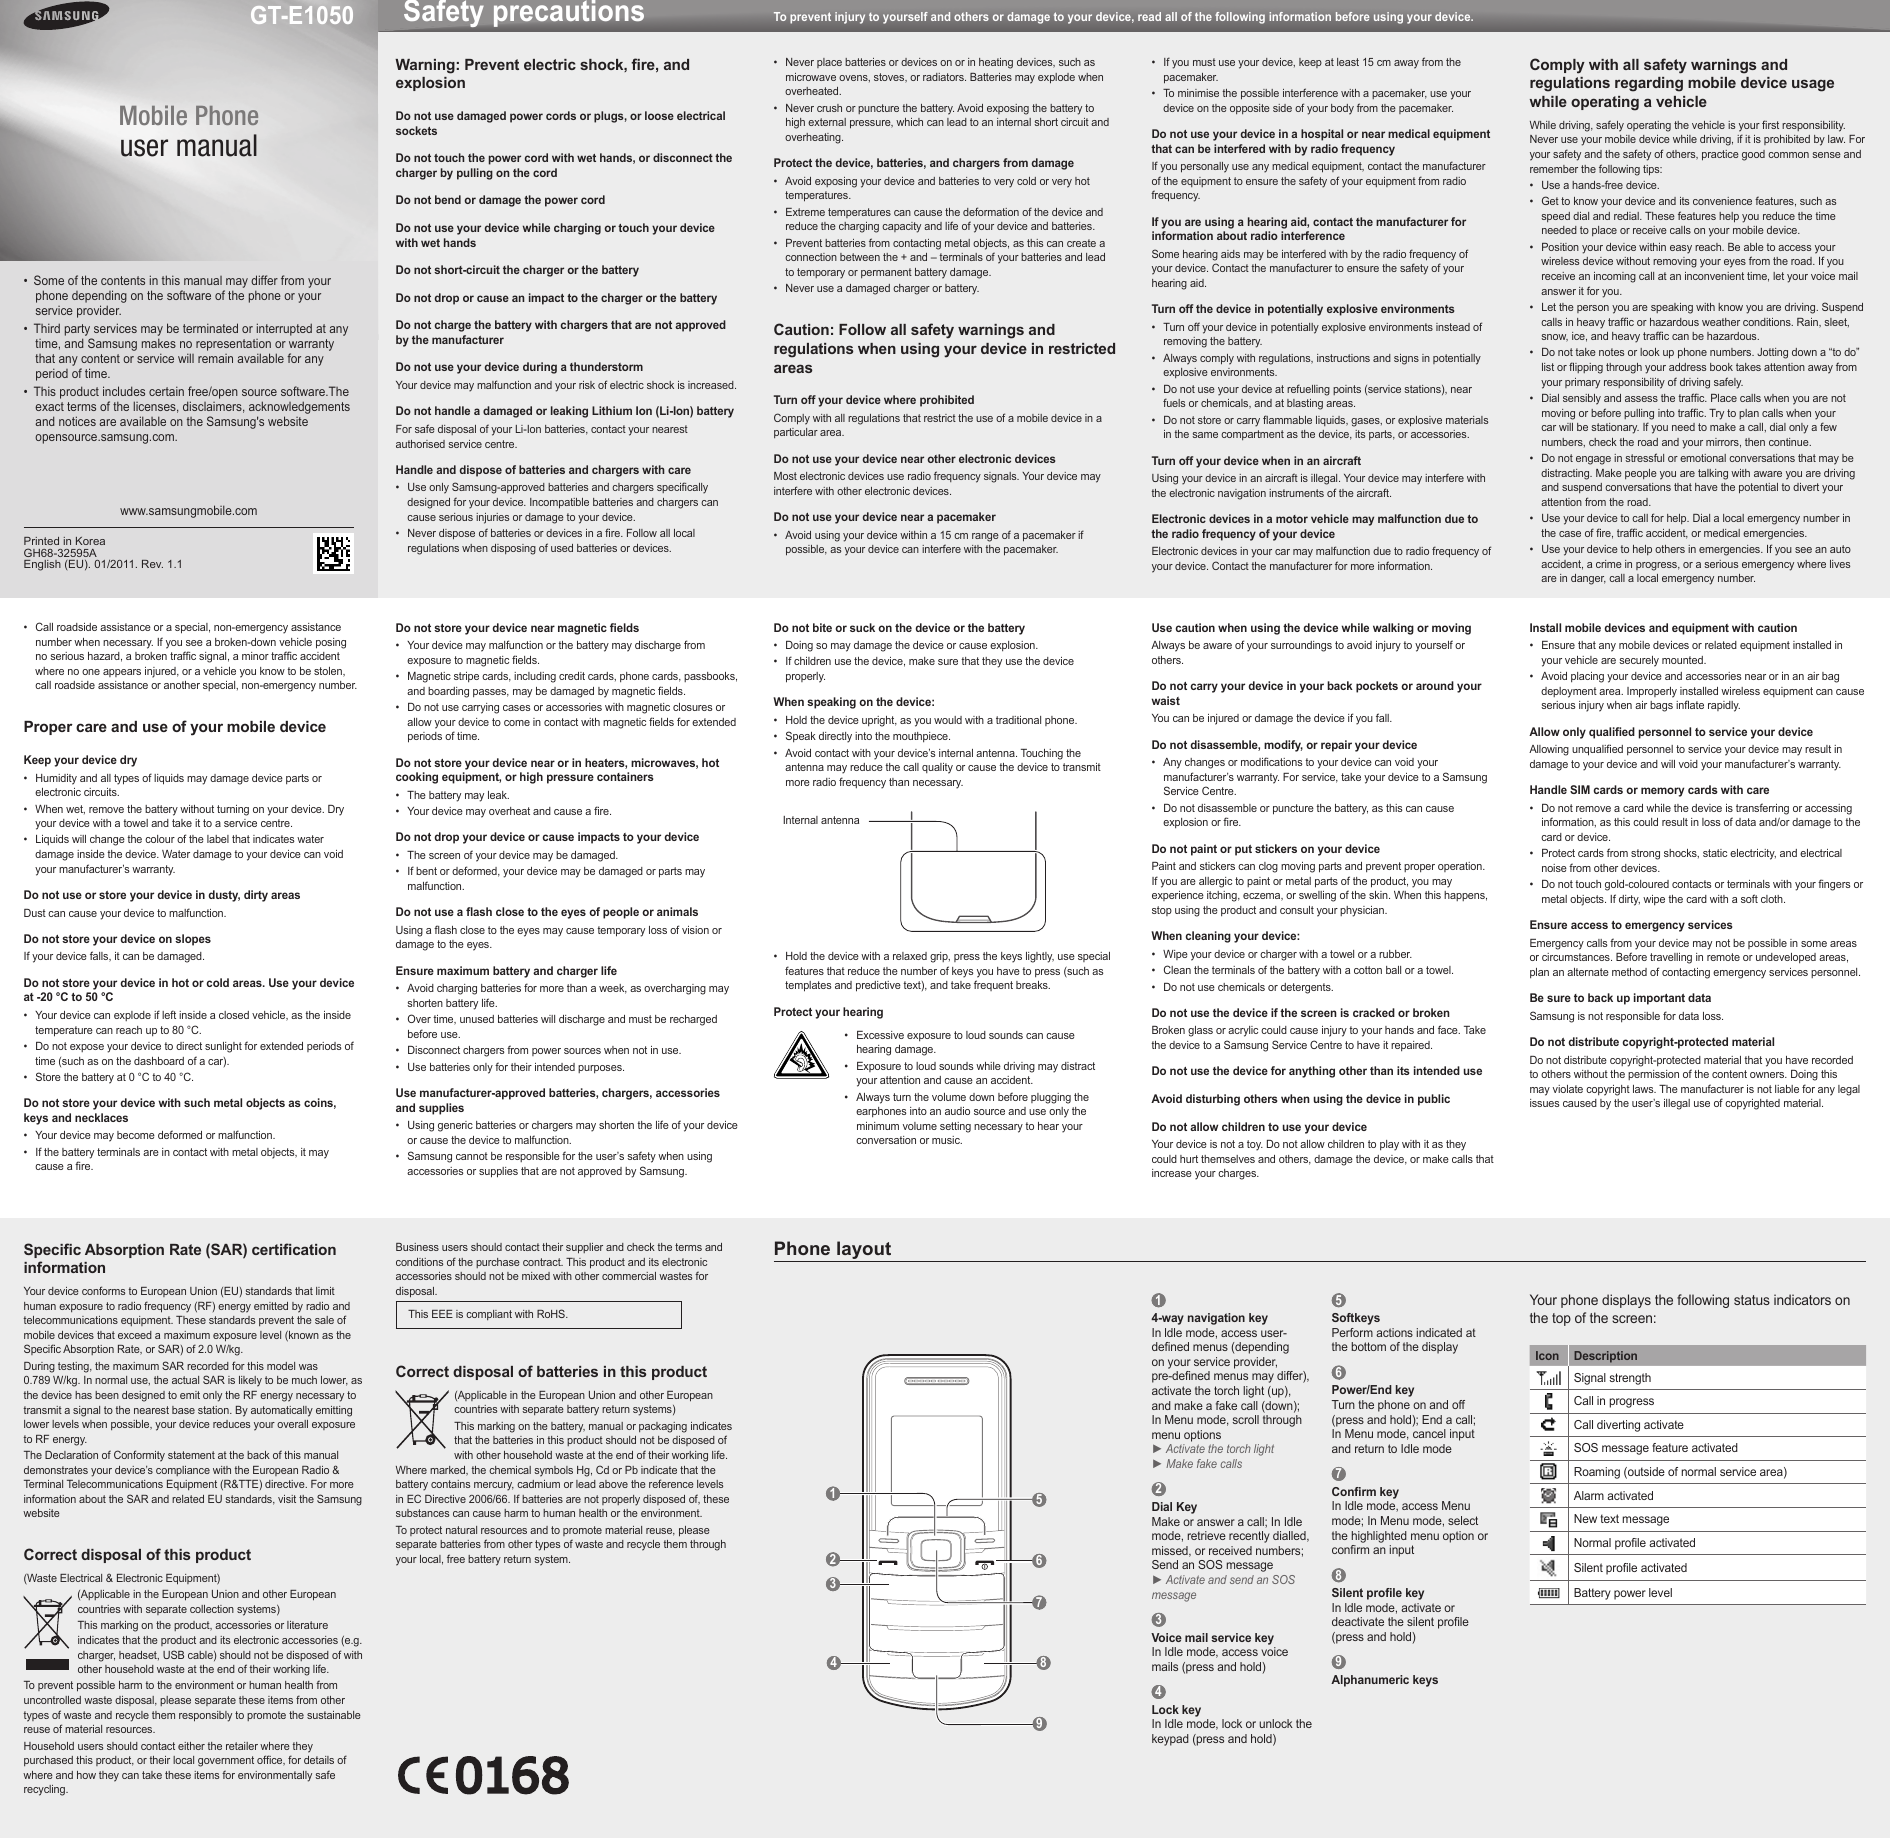 Page 1 of 2 - Samsung Samsung-Gt-E1050-Users-Manual-  Samsung-gt-e1050-users-manual